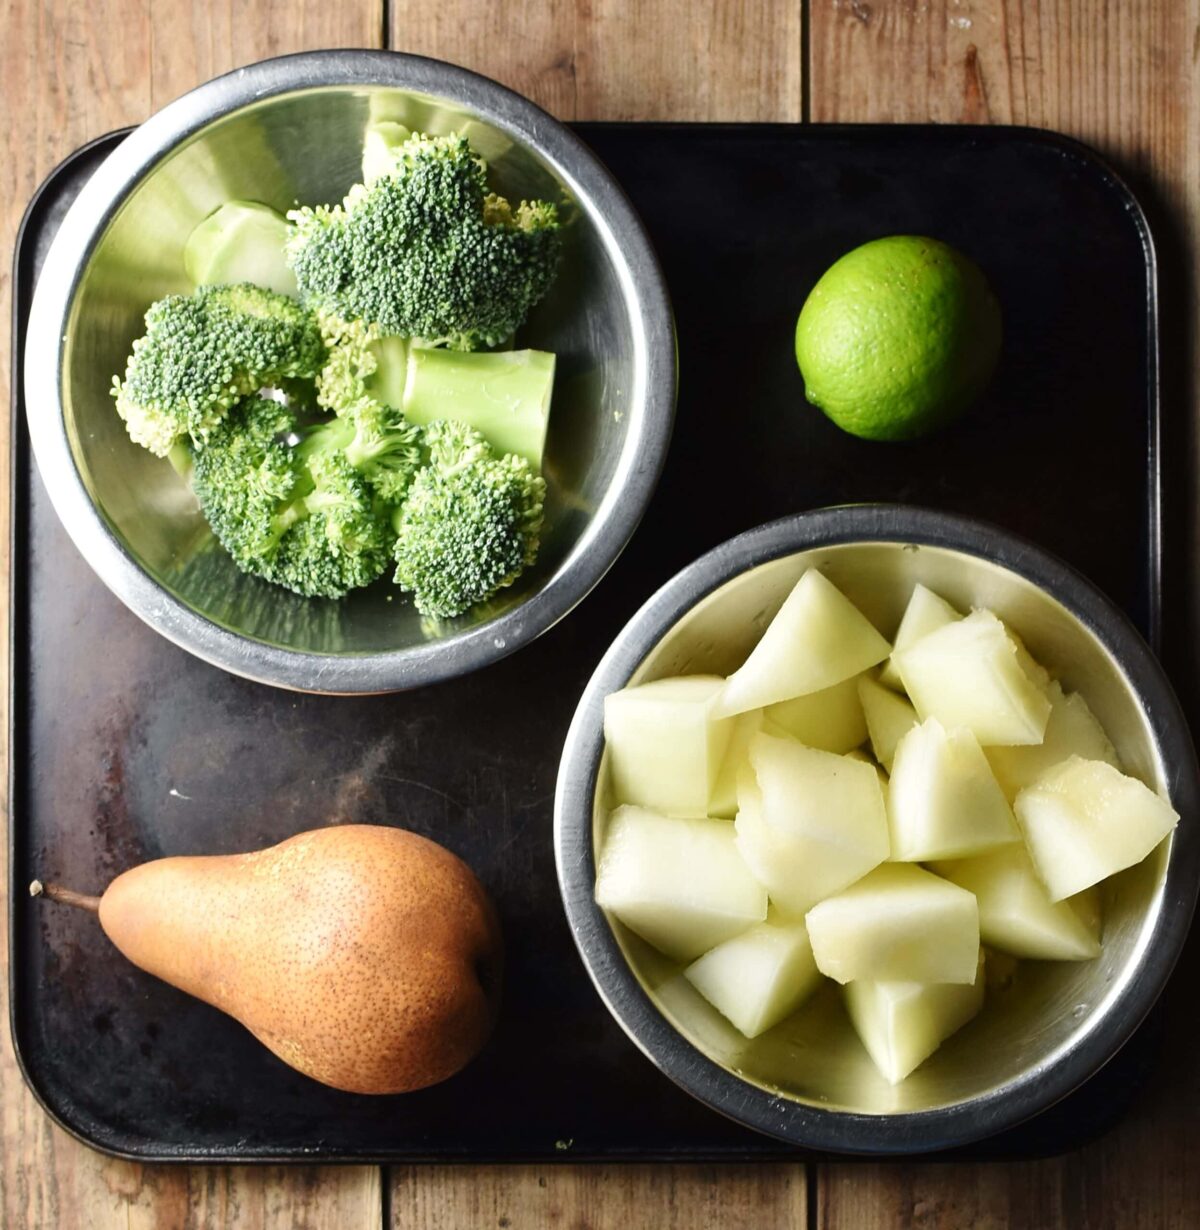 Chopped melon and broccoli in separate metal bowls, pear and lime on top of black tray.